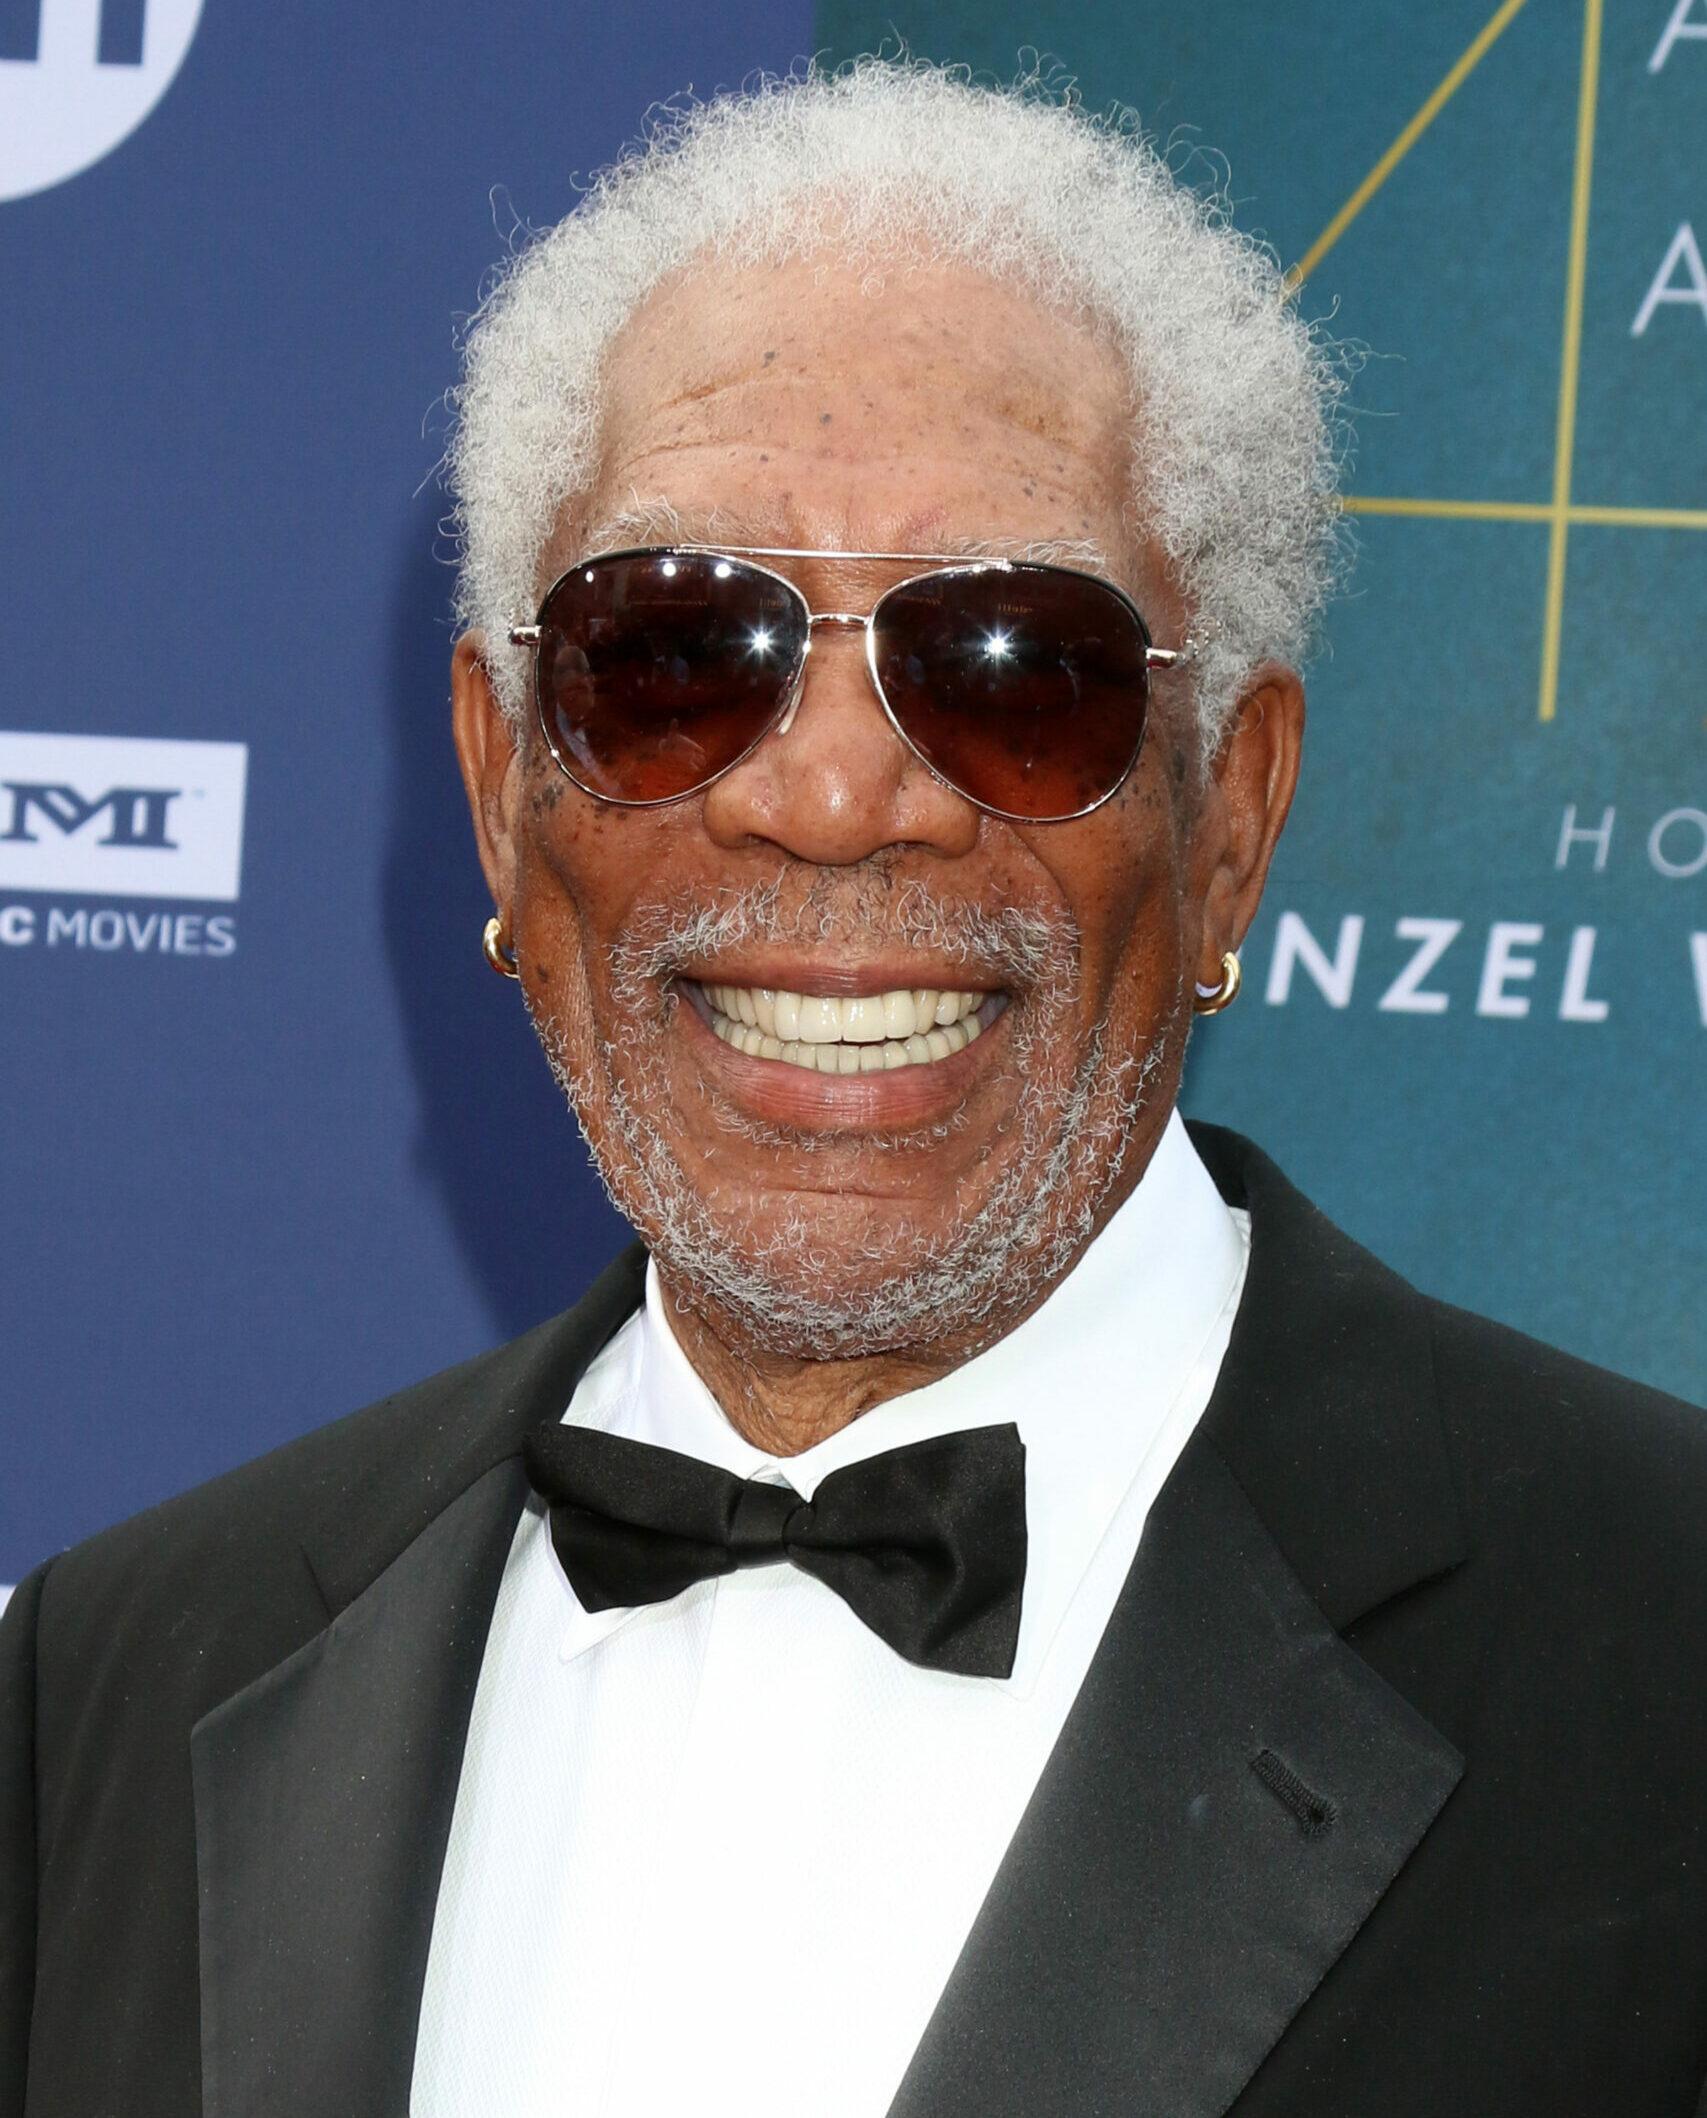 Morgan Freeman at the AFI Honors Denzel Washington at the Dolby Theater on June 6, 2019 in Los Angeles, CA